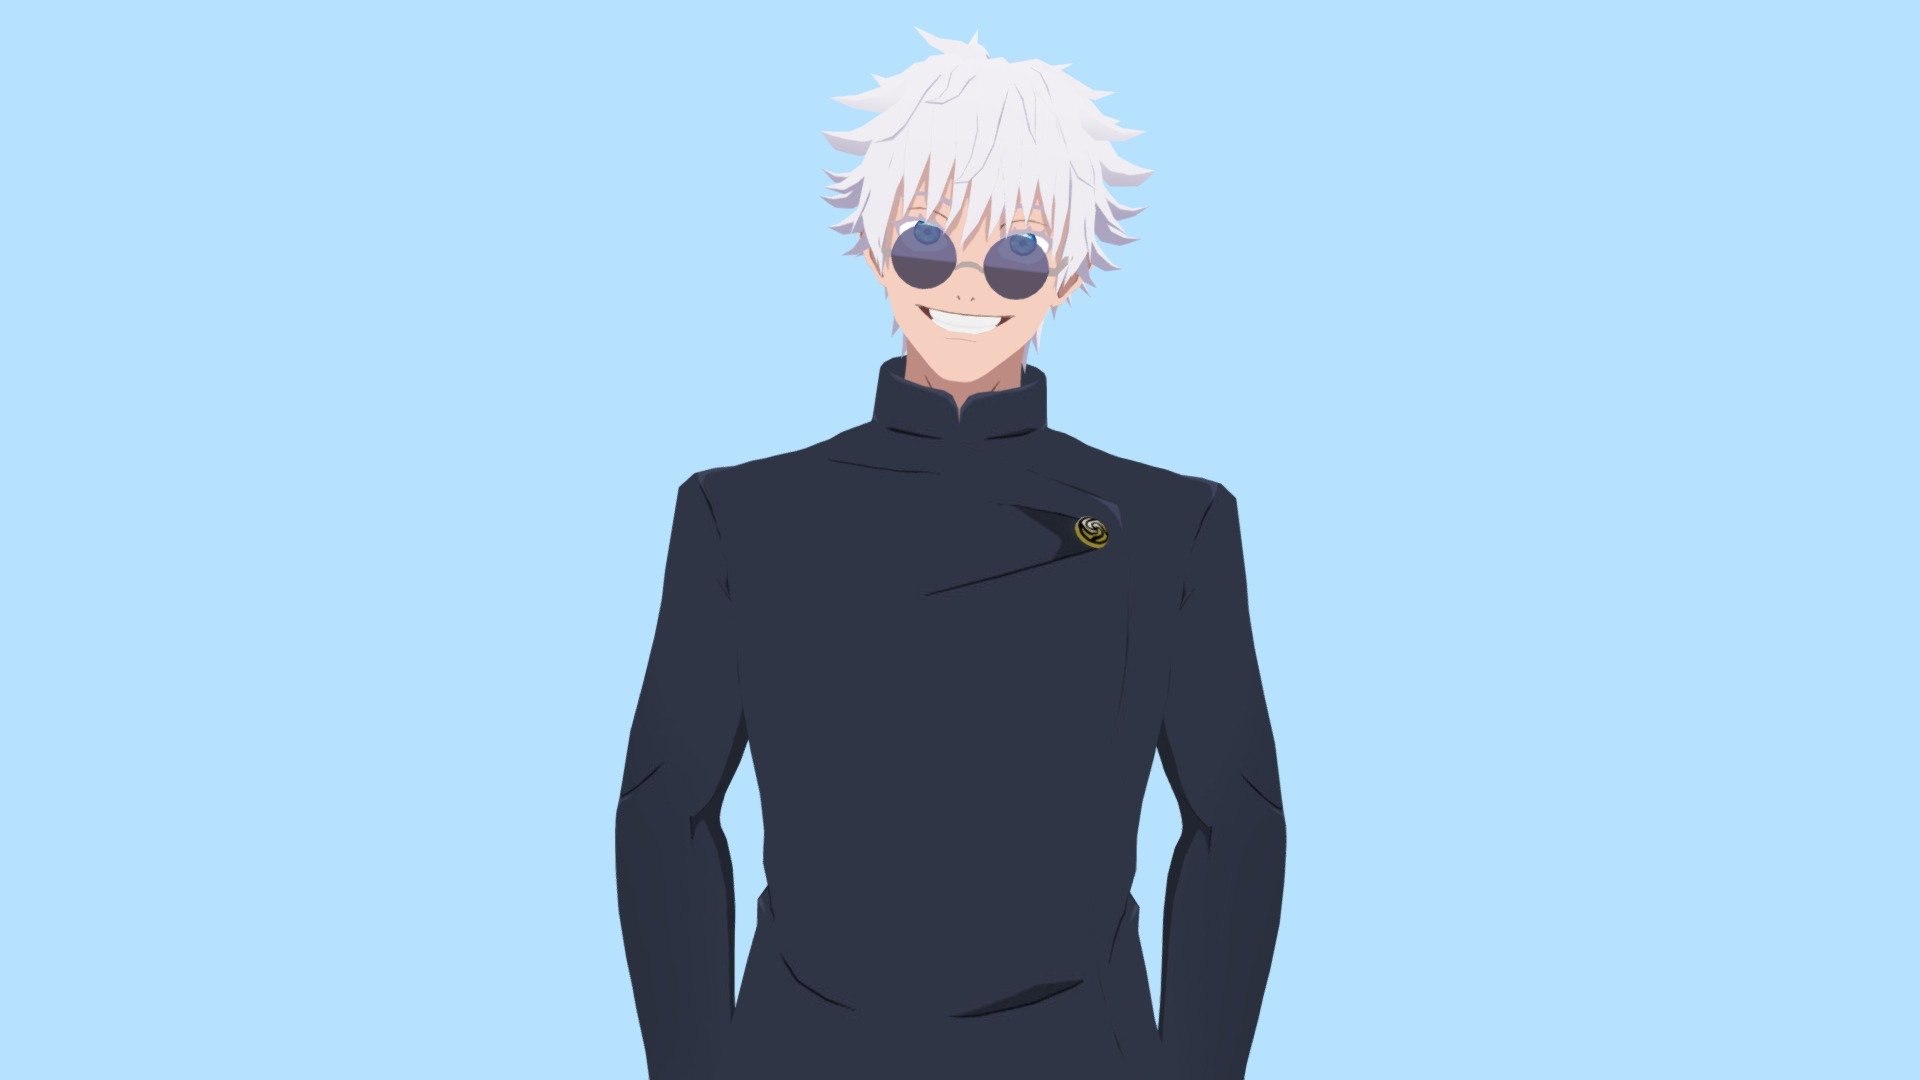 NOTE! Download the ” Additional File ” to get all file. Such as, Blend file ( Rigged &amp; Unrigged ), Fbx file ( Rigged &amp; Unrigged ), GLB file ( Rigged &amp; Unrigged )

GOJO SATORU
One of the Strongest Characters in The Jujutsu Kaisen Anime

3D model made in Blender 3.1.2 version - Young Gojo Satoru - Jujutsu Kaisen - Buy Royalty Free 3D model by ridho.mnf 3d model